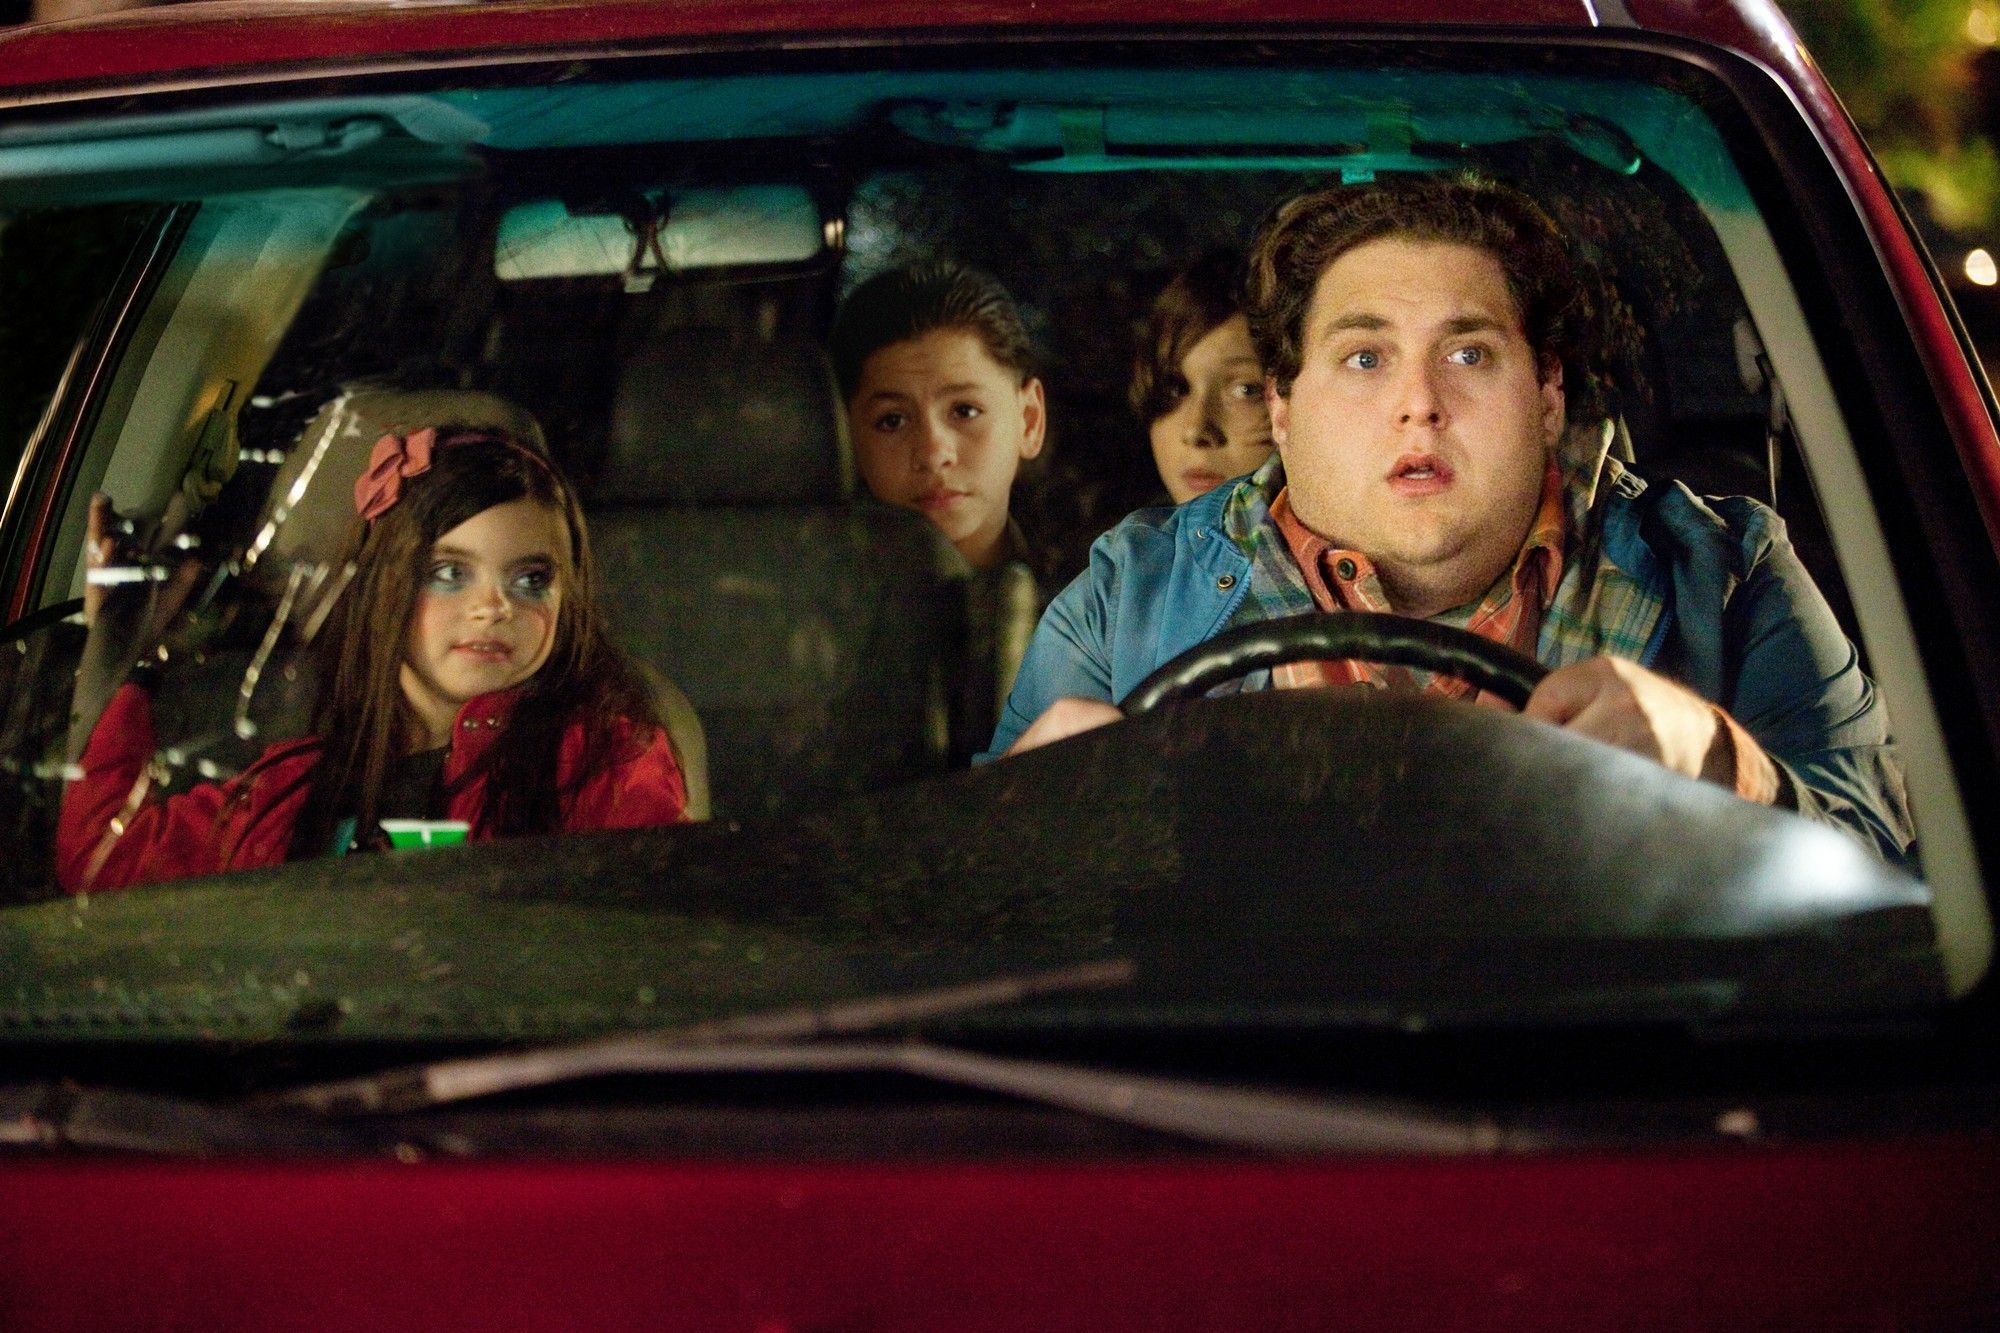 Landry Bender, Max Records and Jonah Hill in 20th Century Fox's The Sitter (2011)